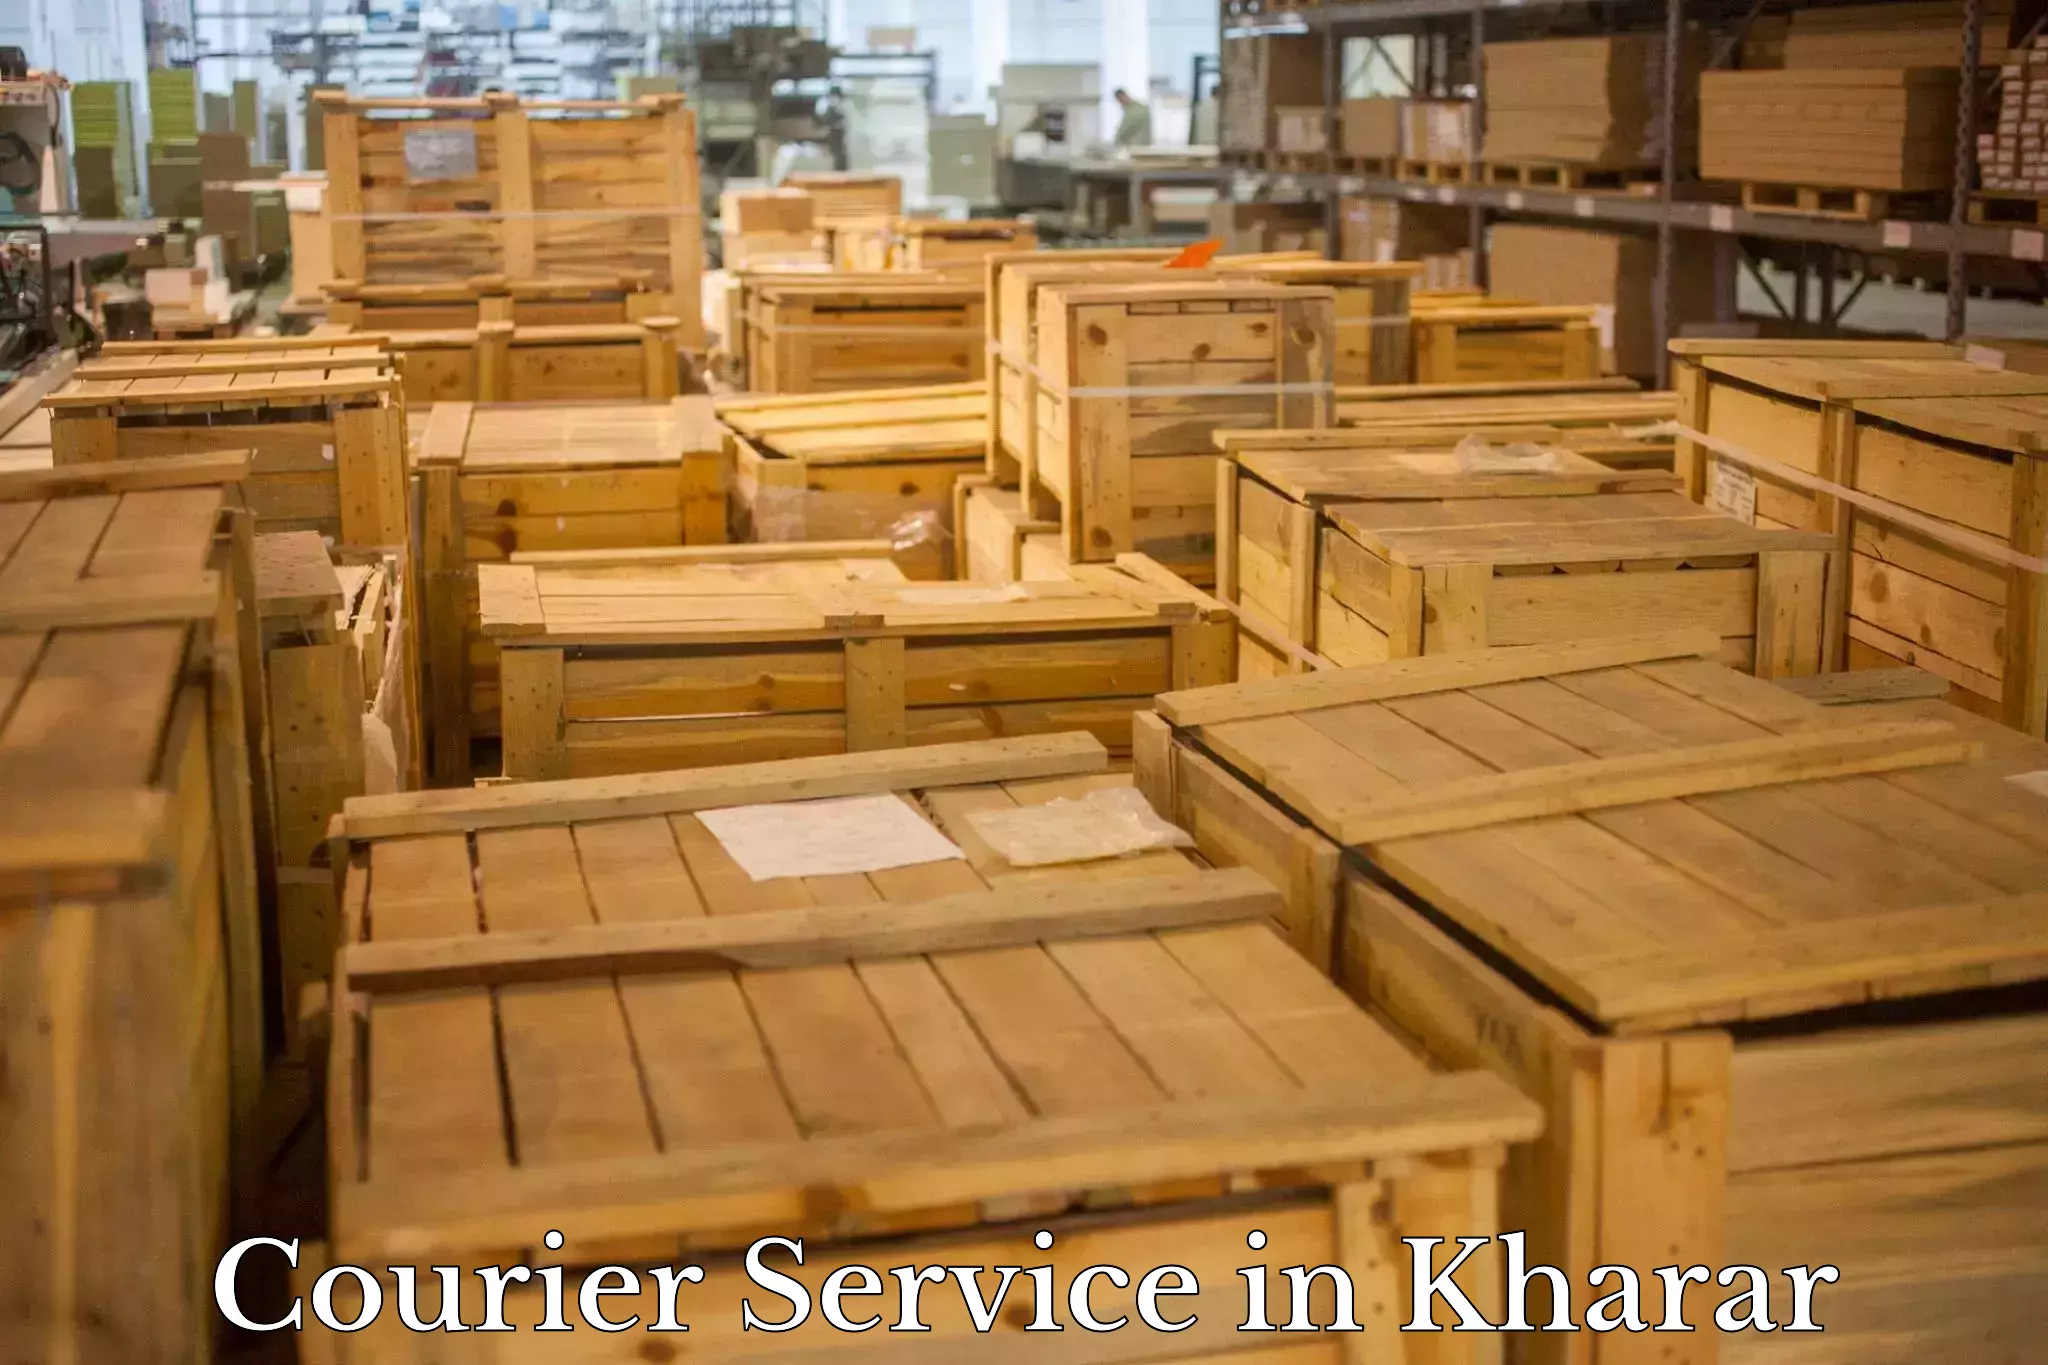 Logistics and distribution in Kharar